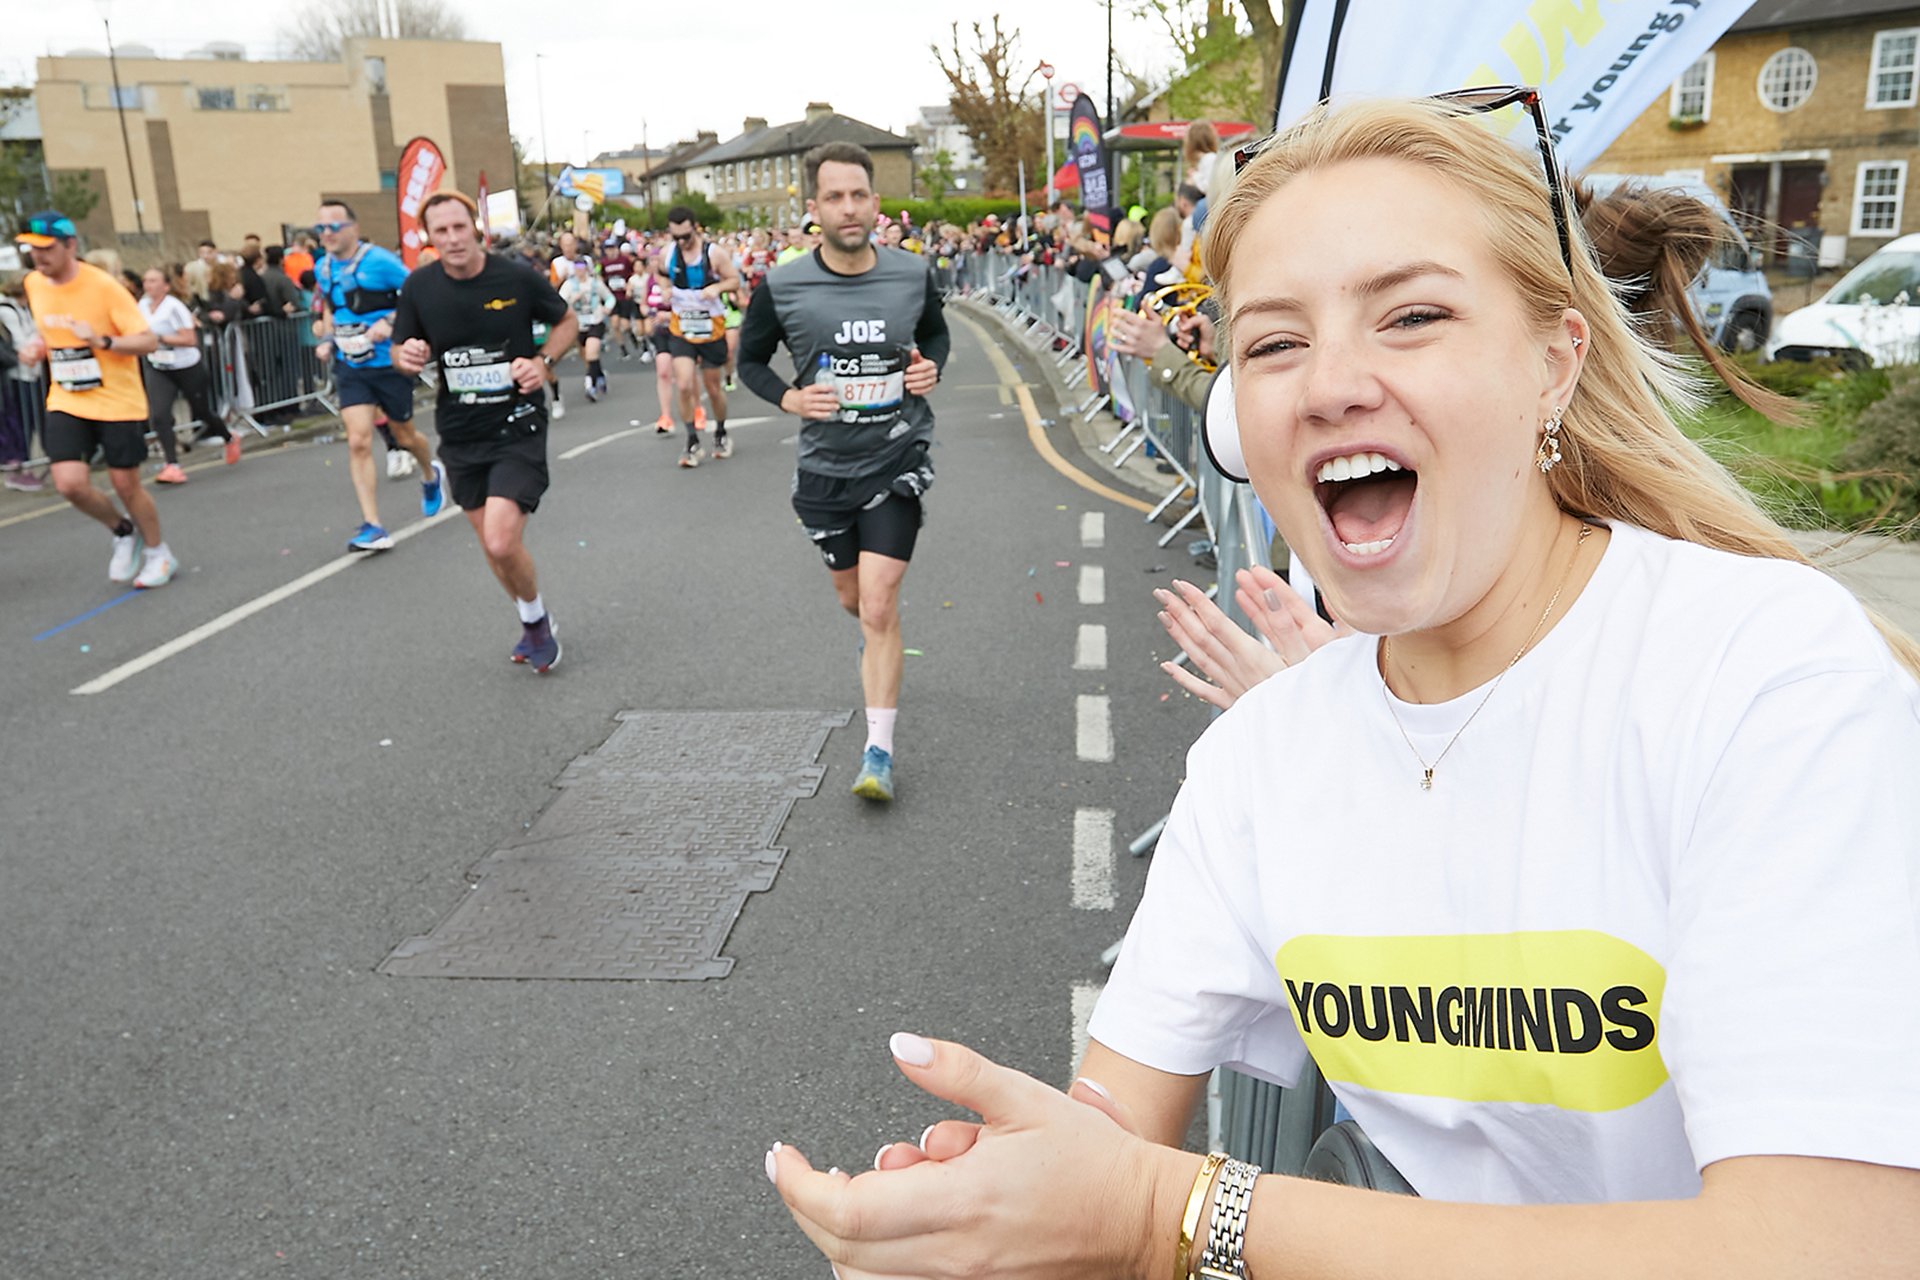 A YoungMinds marathon runner being supported by YoungMinds staff on the side line.